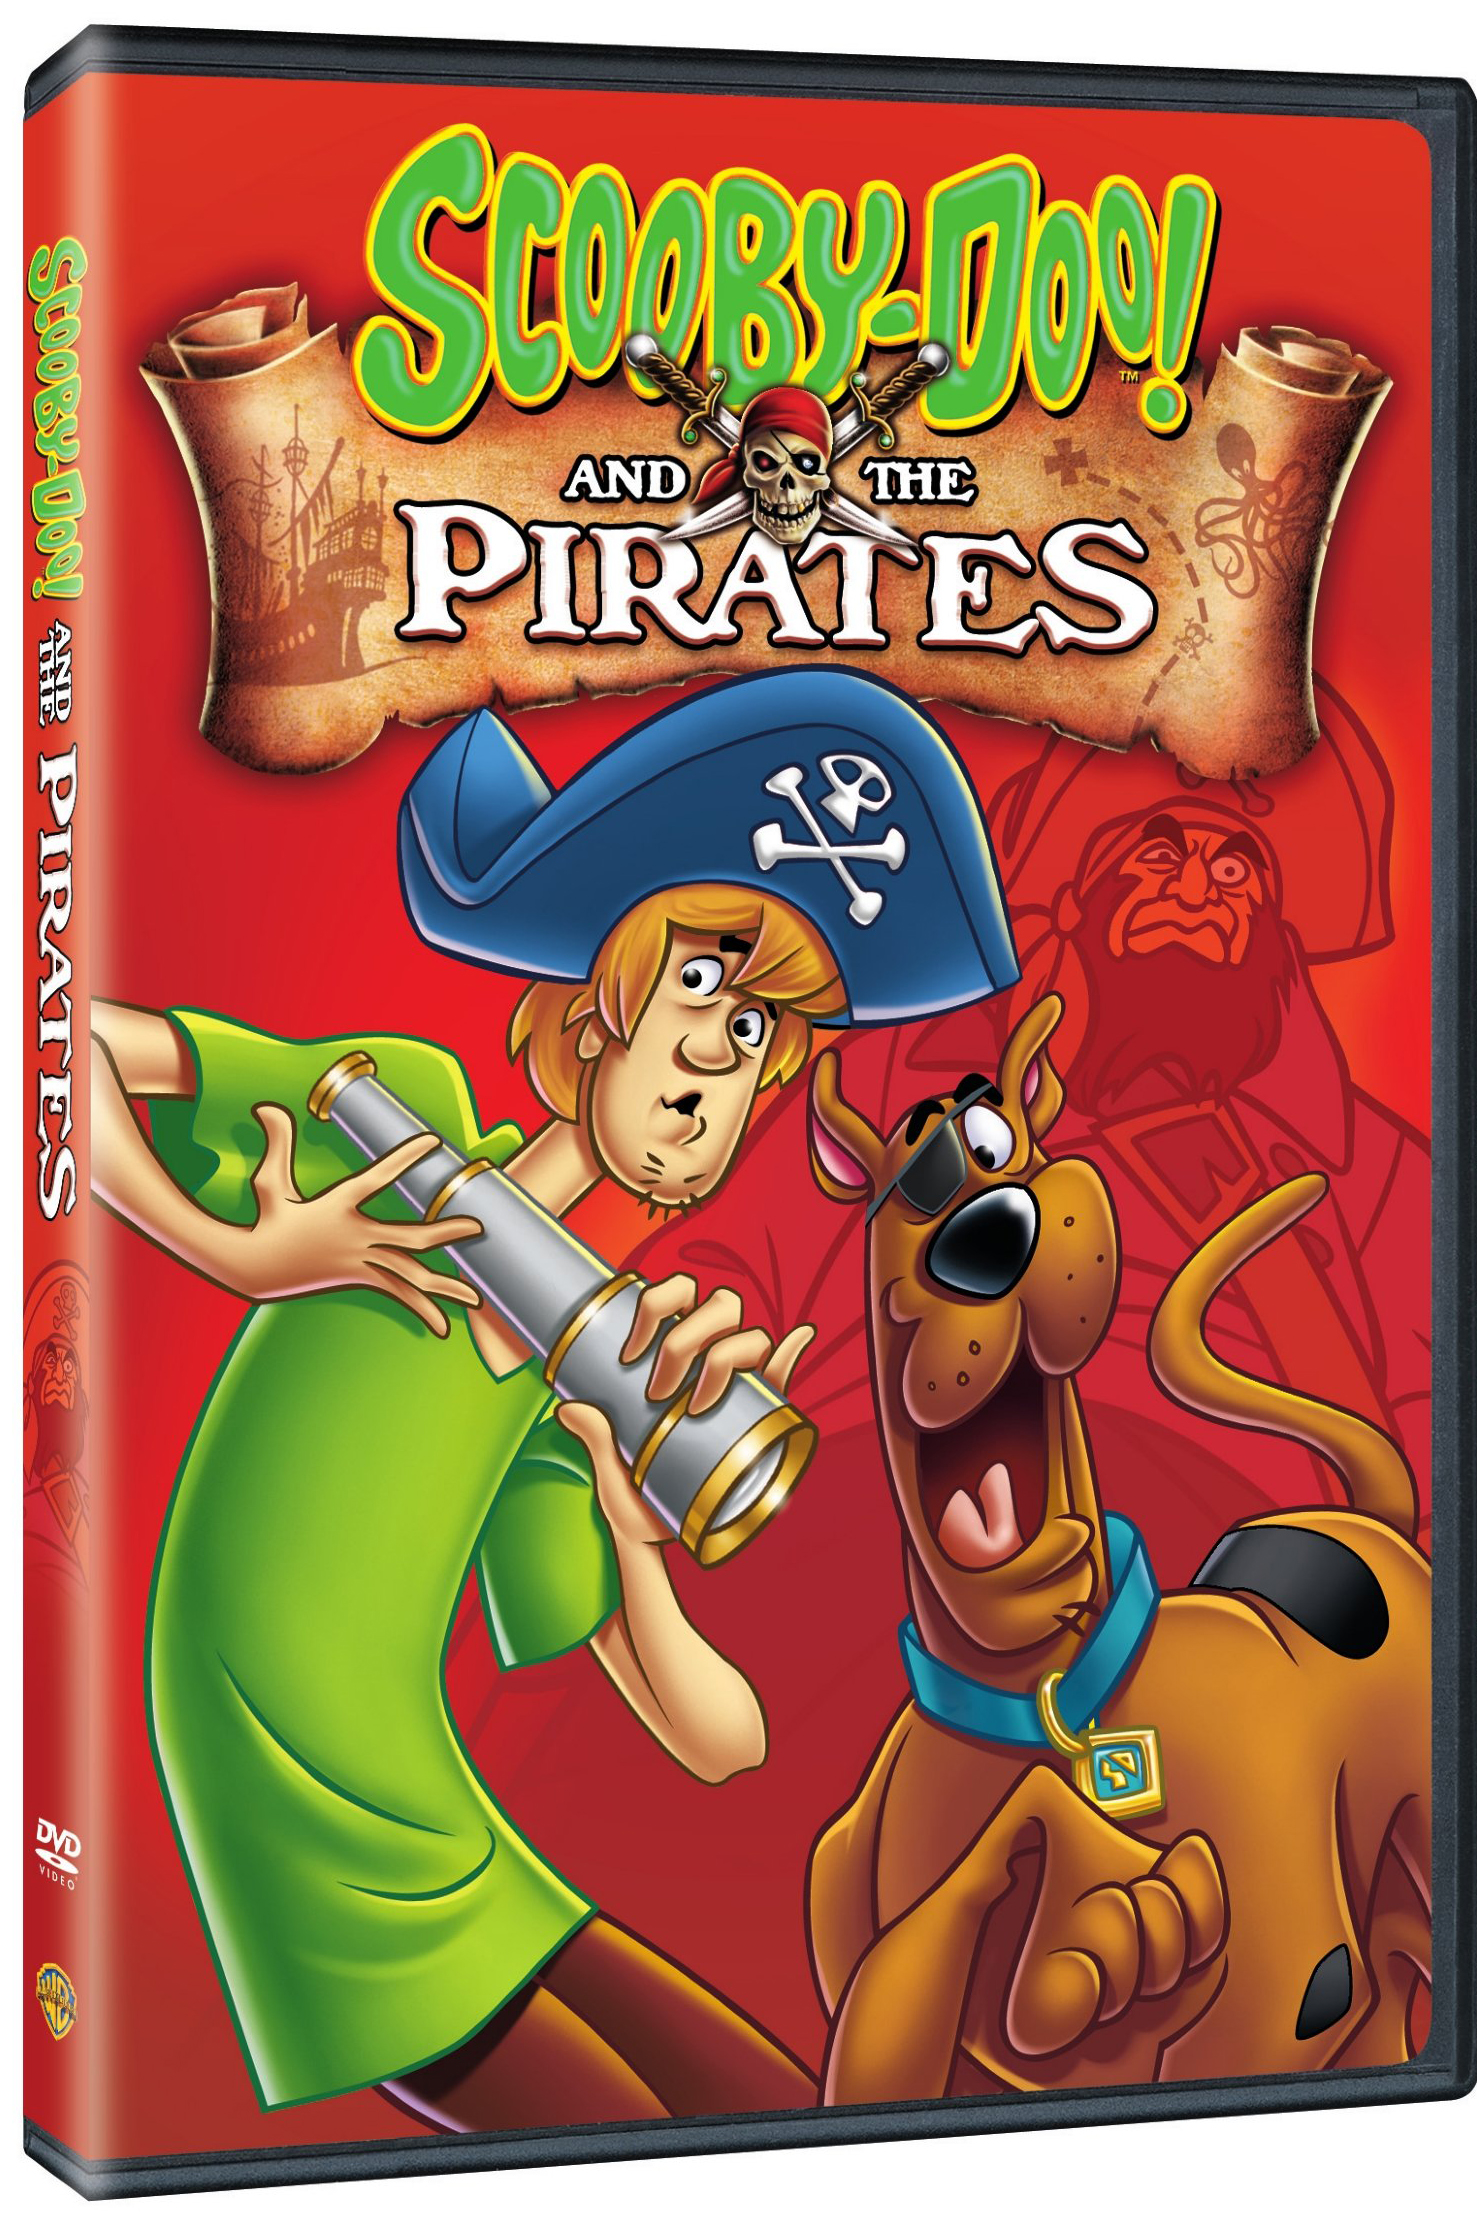 Scooby-Doo! And the Pirates (DVD), Warner Home Video, Animation - image 3 of 3